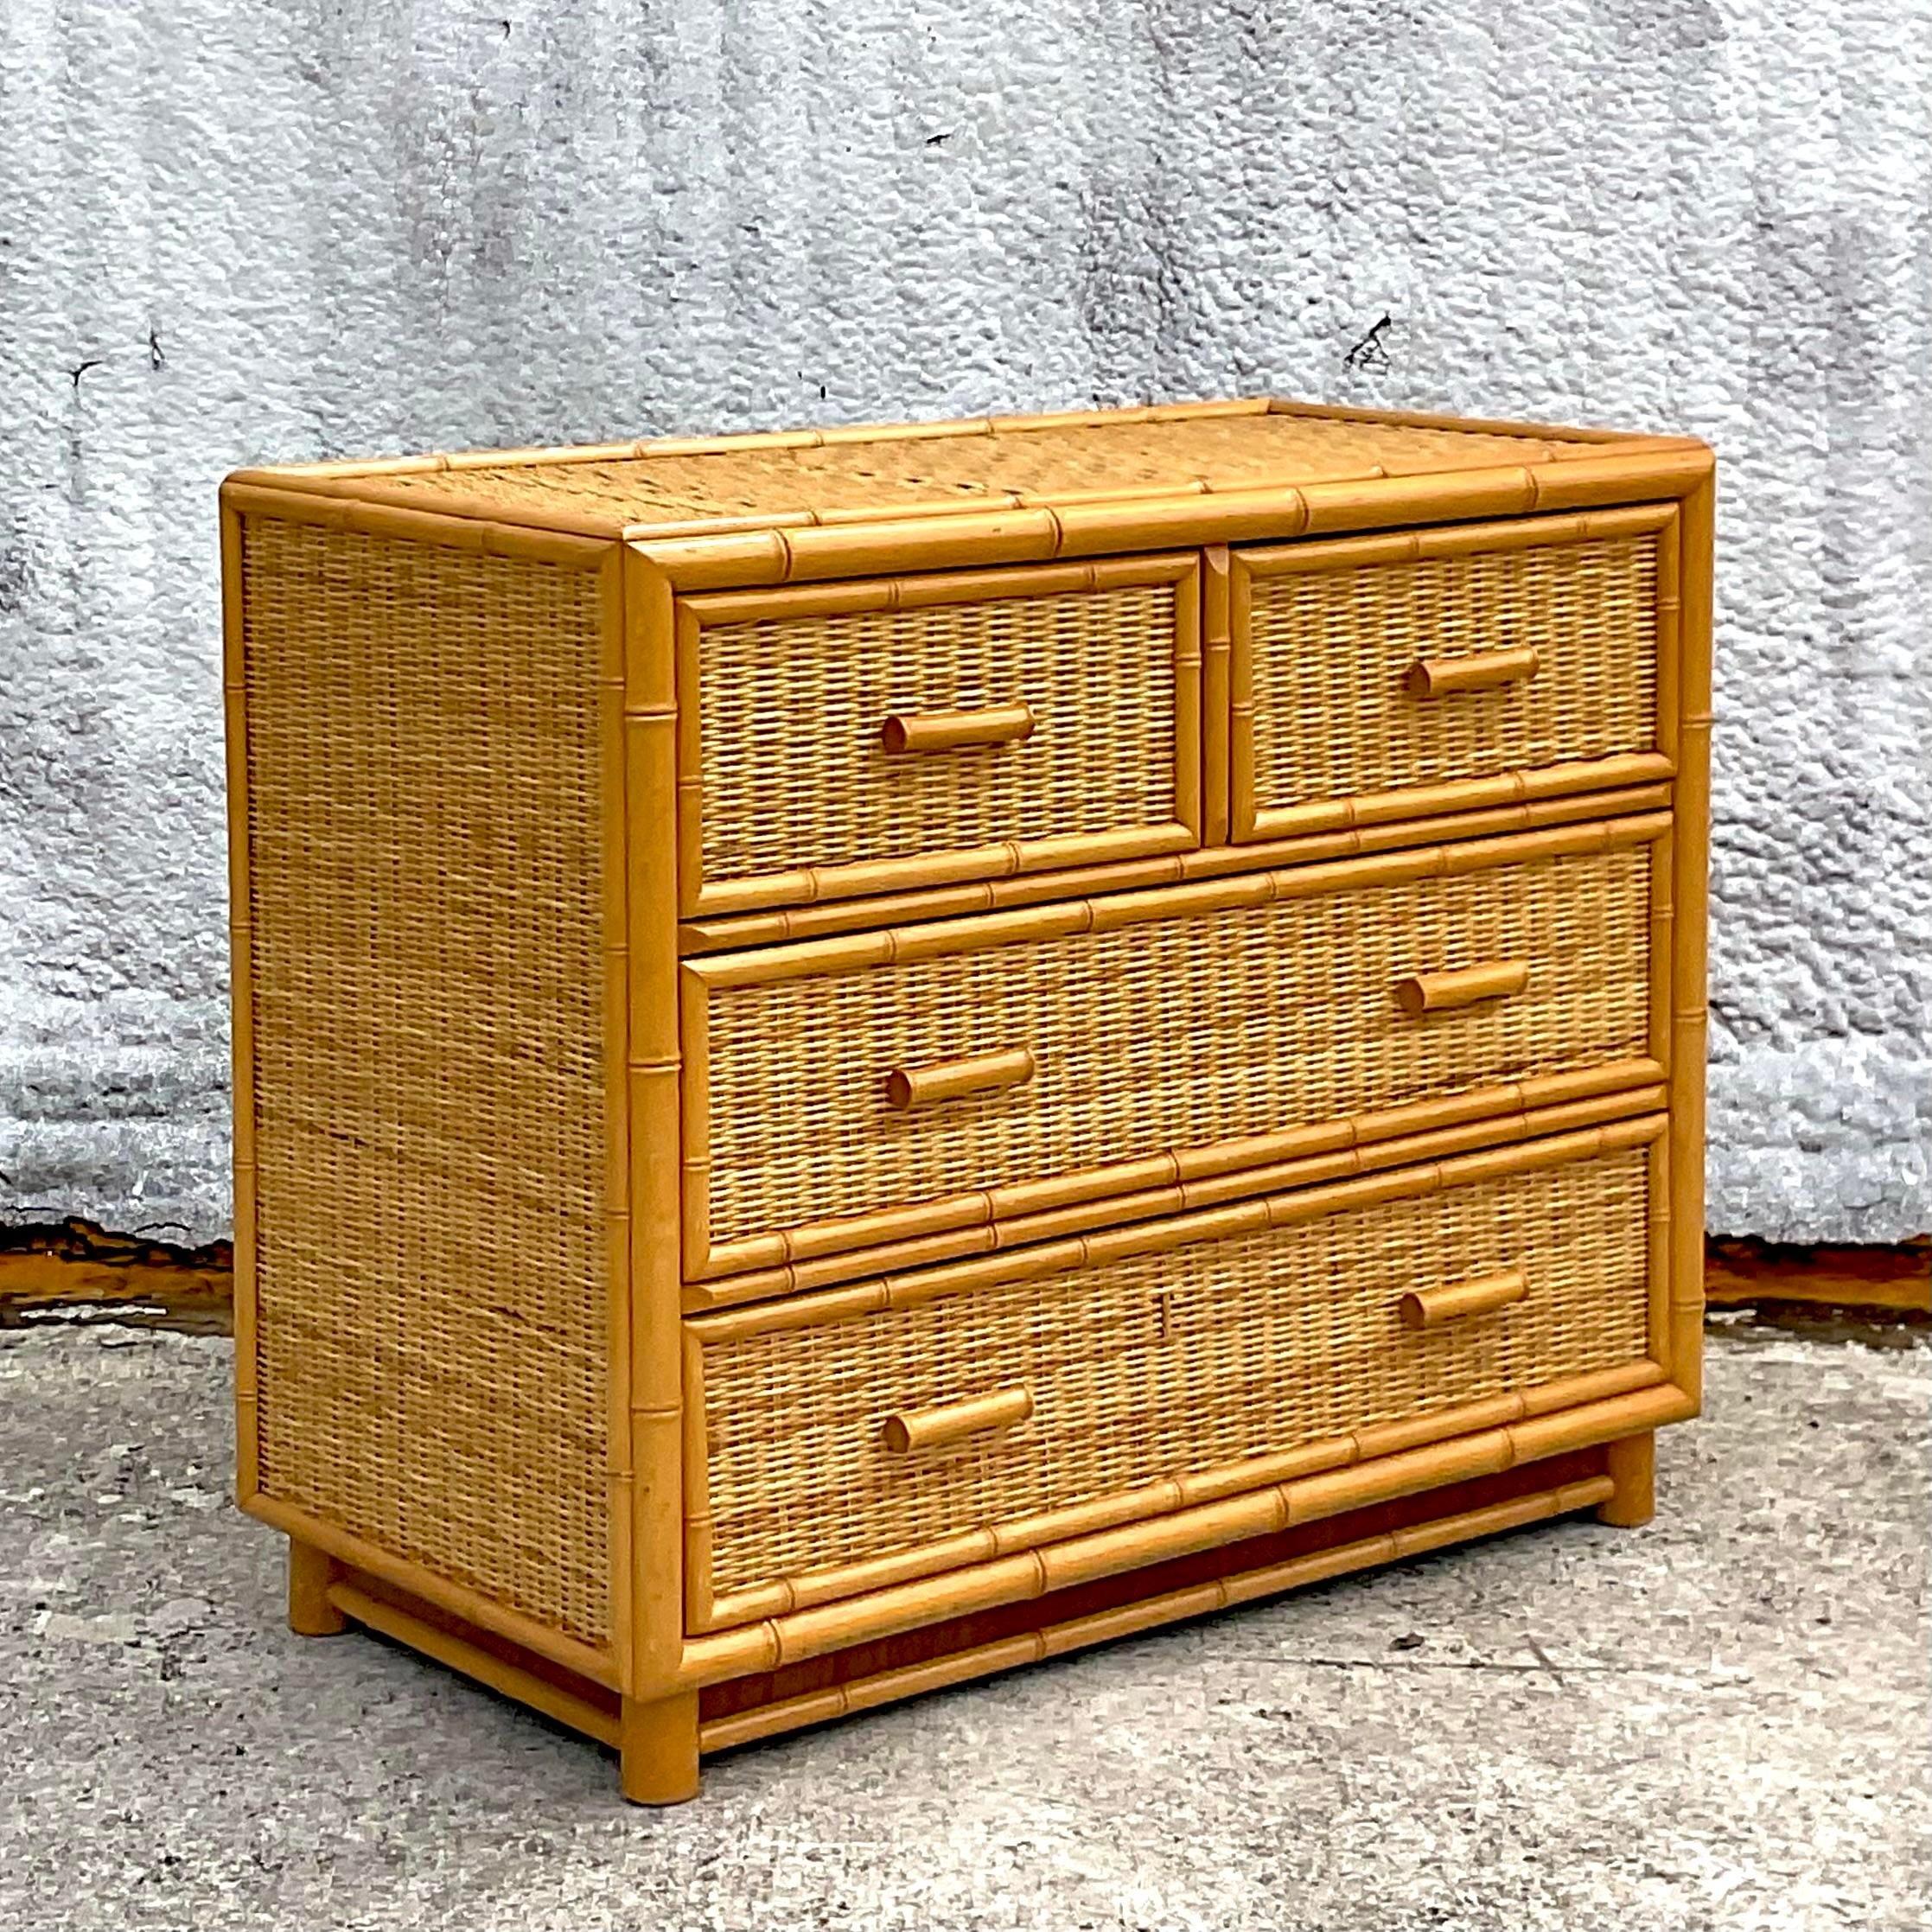 Elevate your coastal-inspired decor with our Vintage Coastal Woven Rattan Chest of Drawers. Handcrafted to perfection, this piece exudes American charm and functionality. The intricate woven rattan design adds a touch of rustic elegance, while its